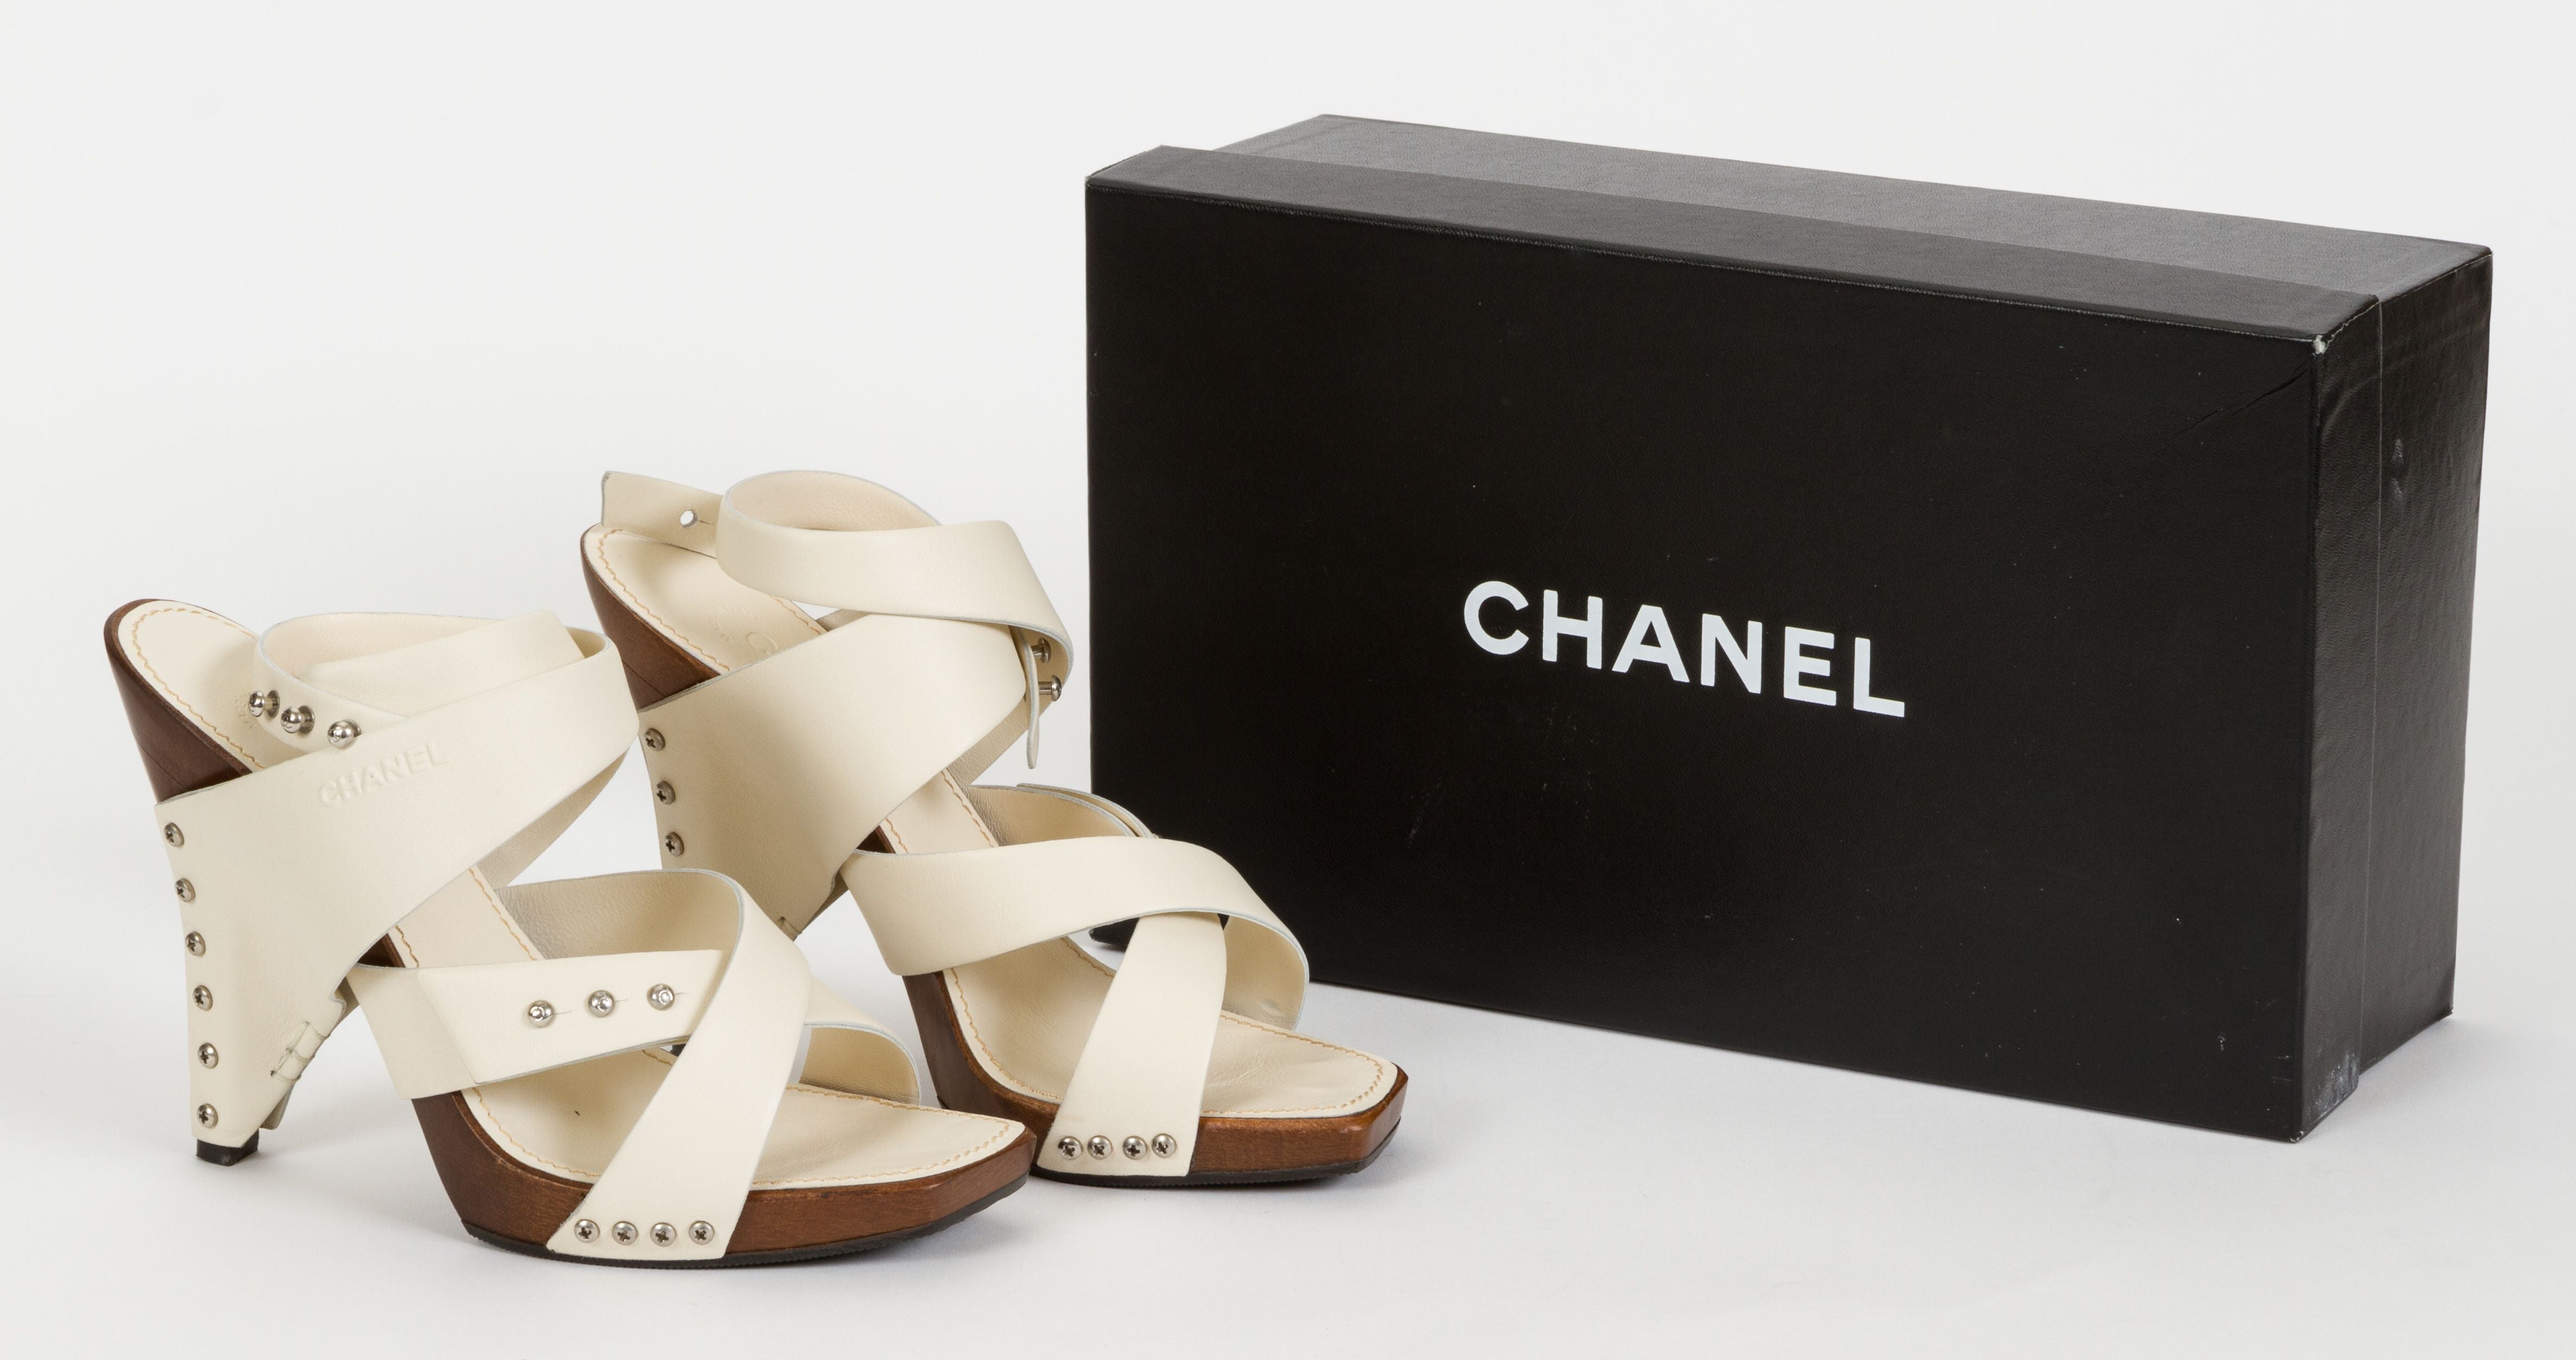 Chanel Cream Leather & Wood Sandals 37.5 - Vintage Lux